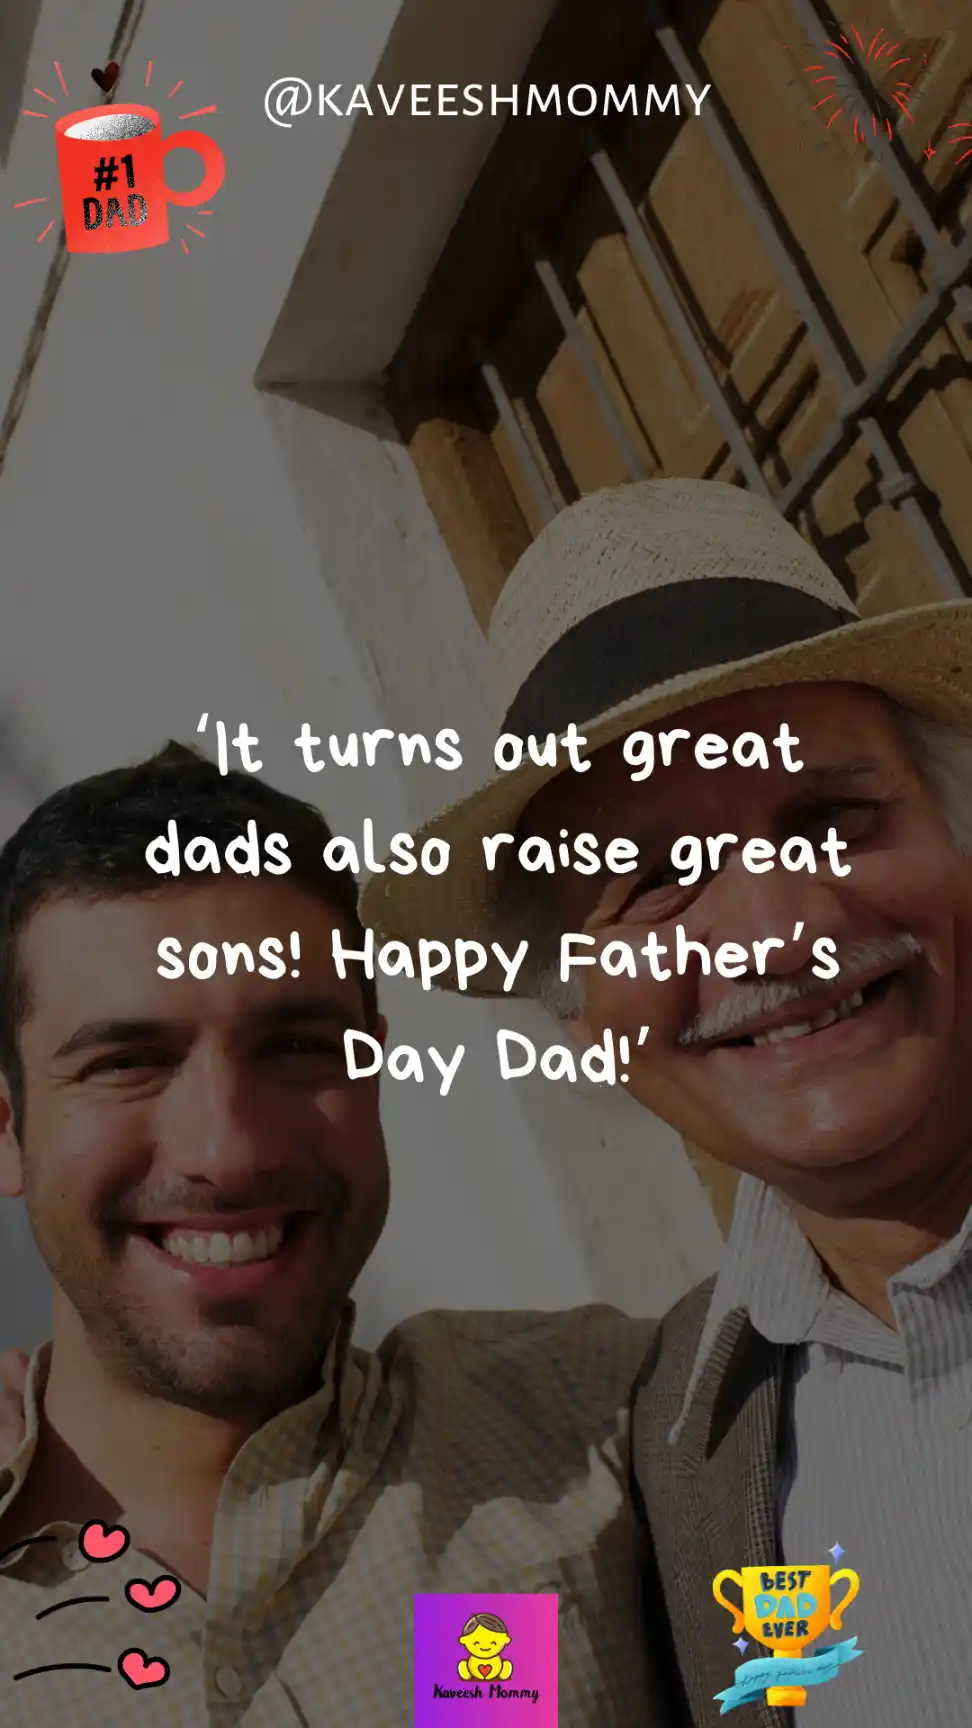 happy fathers day son images-‘It turns out great dads also raise great sons! Happy Father’s Day Dad!’